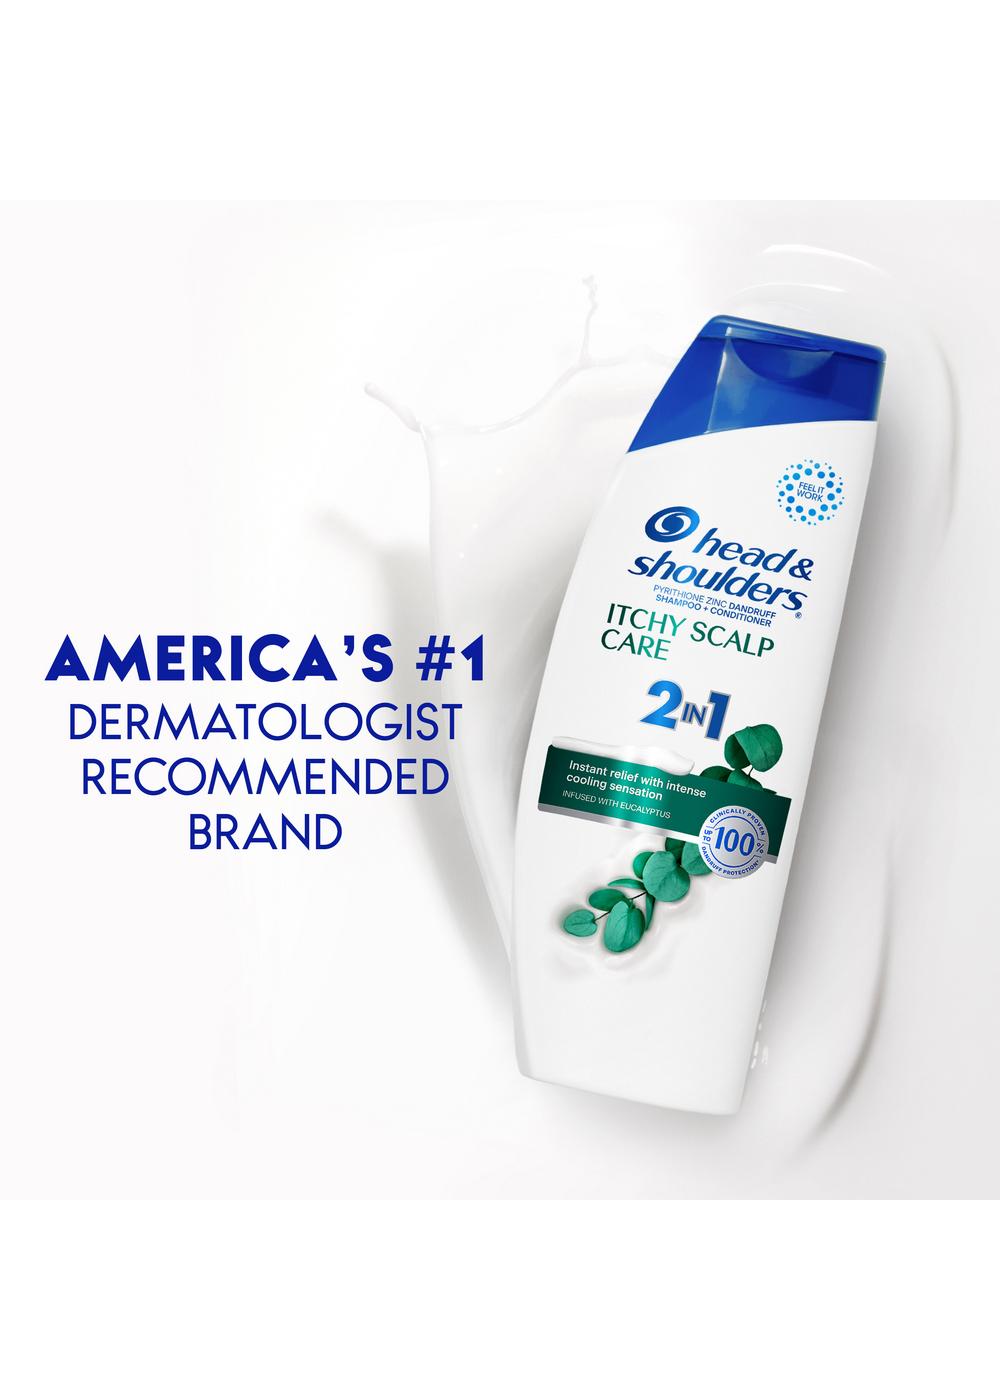 Head & Shoulders Itchy Scalp Care 2in1 Dandruff Shampoo & Conditioner ; image 9 of 11